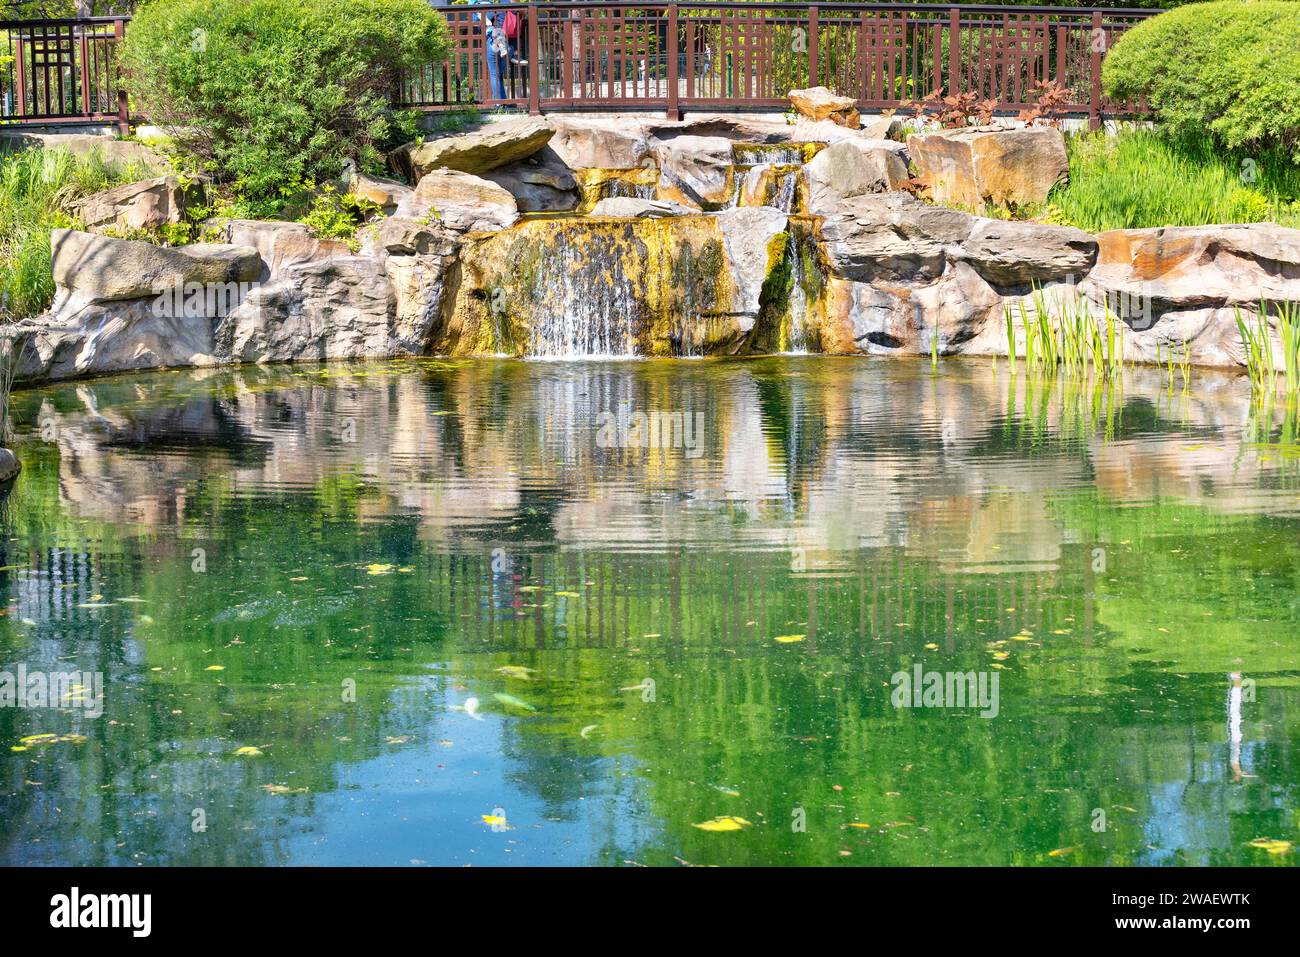 A waterfall sparkling in the sun's rays in a summer pond in the landscape design of a summer park. Stock Photo